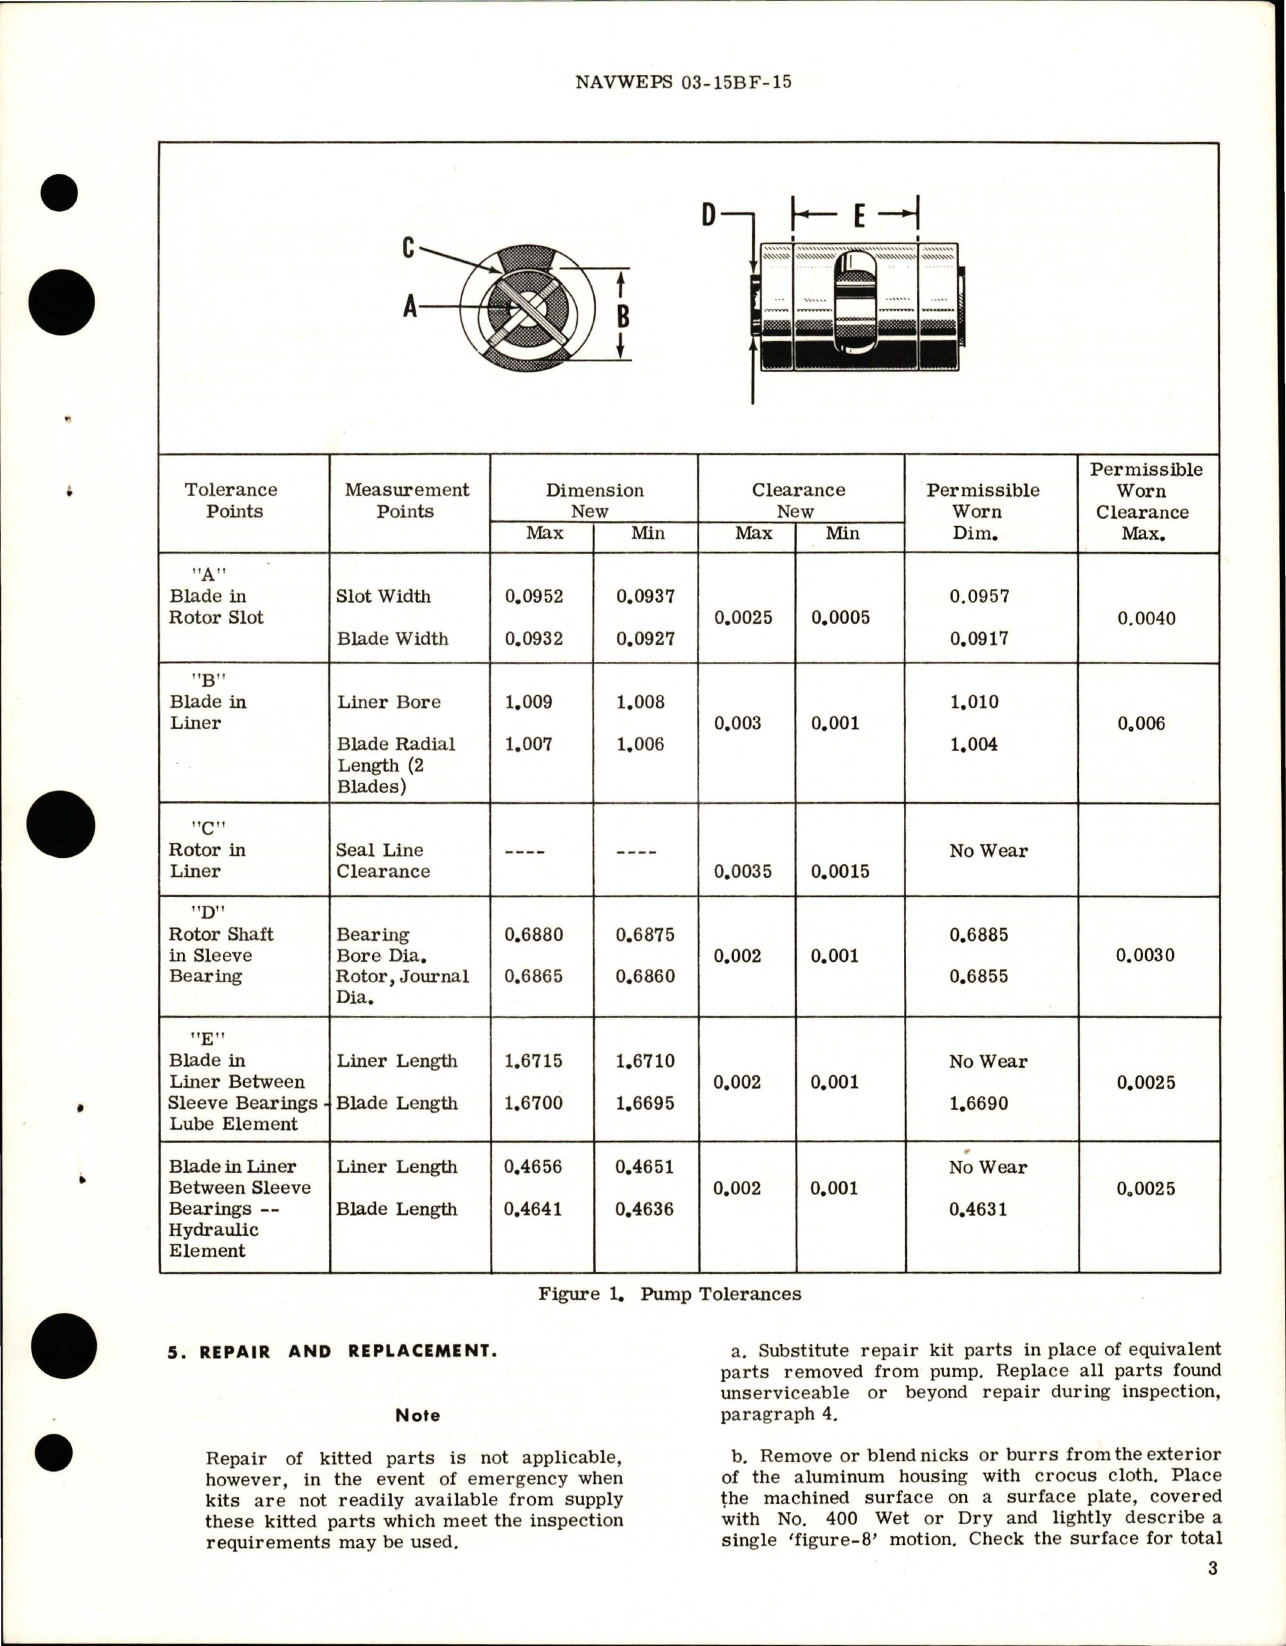 Sample page 5 from AirCorps Library document: Overhaul Instructions with Parts for Lube Oil & Hydraulic Pump - Model RR16000B and RR16000C